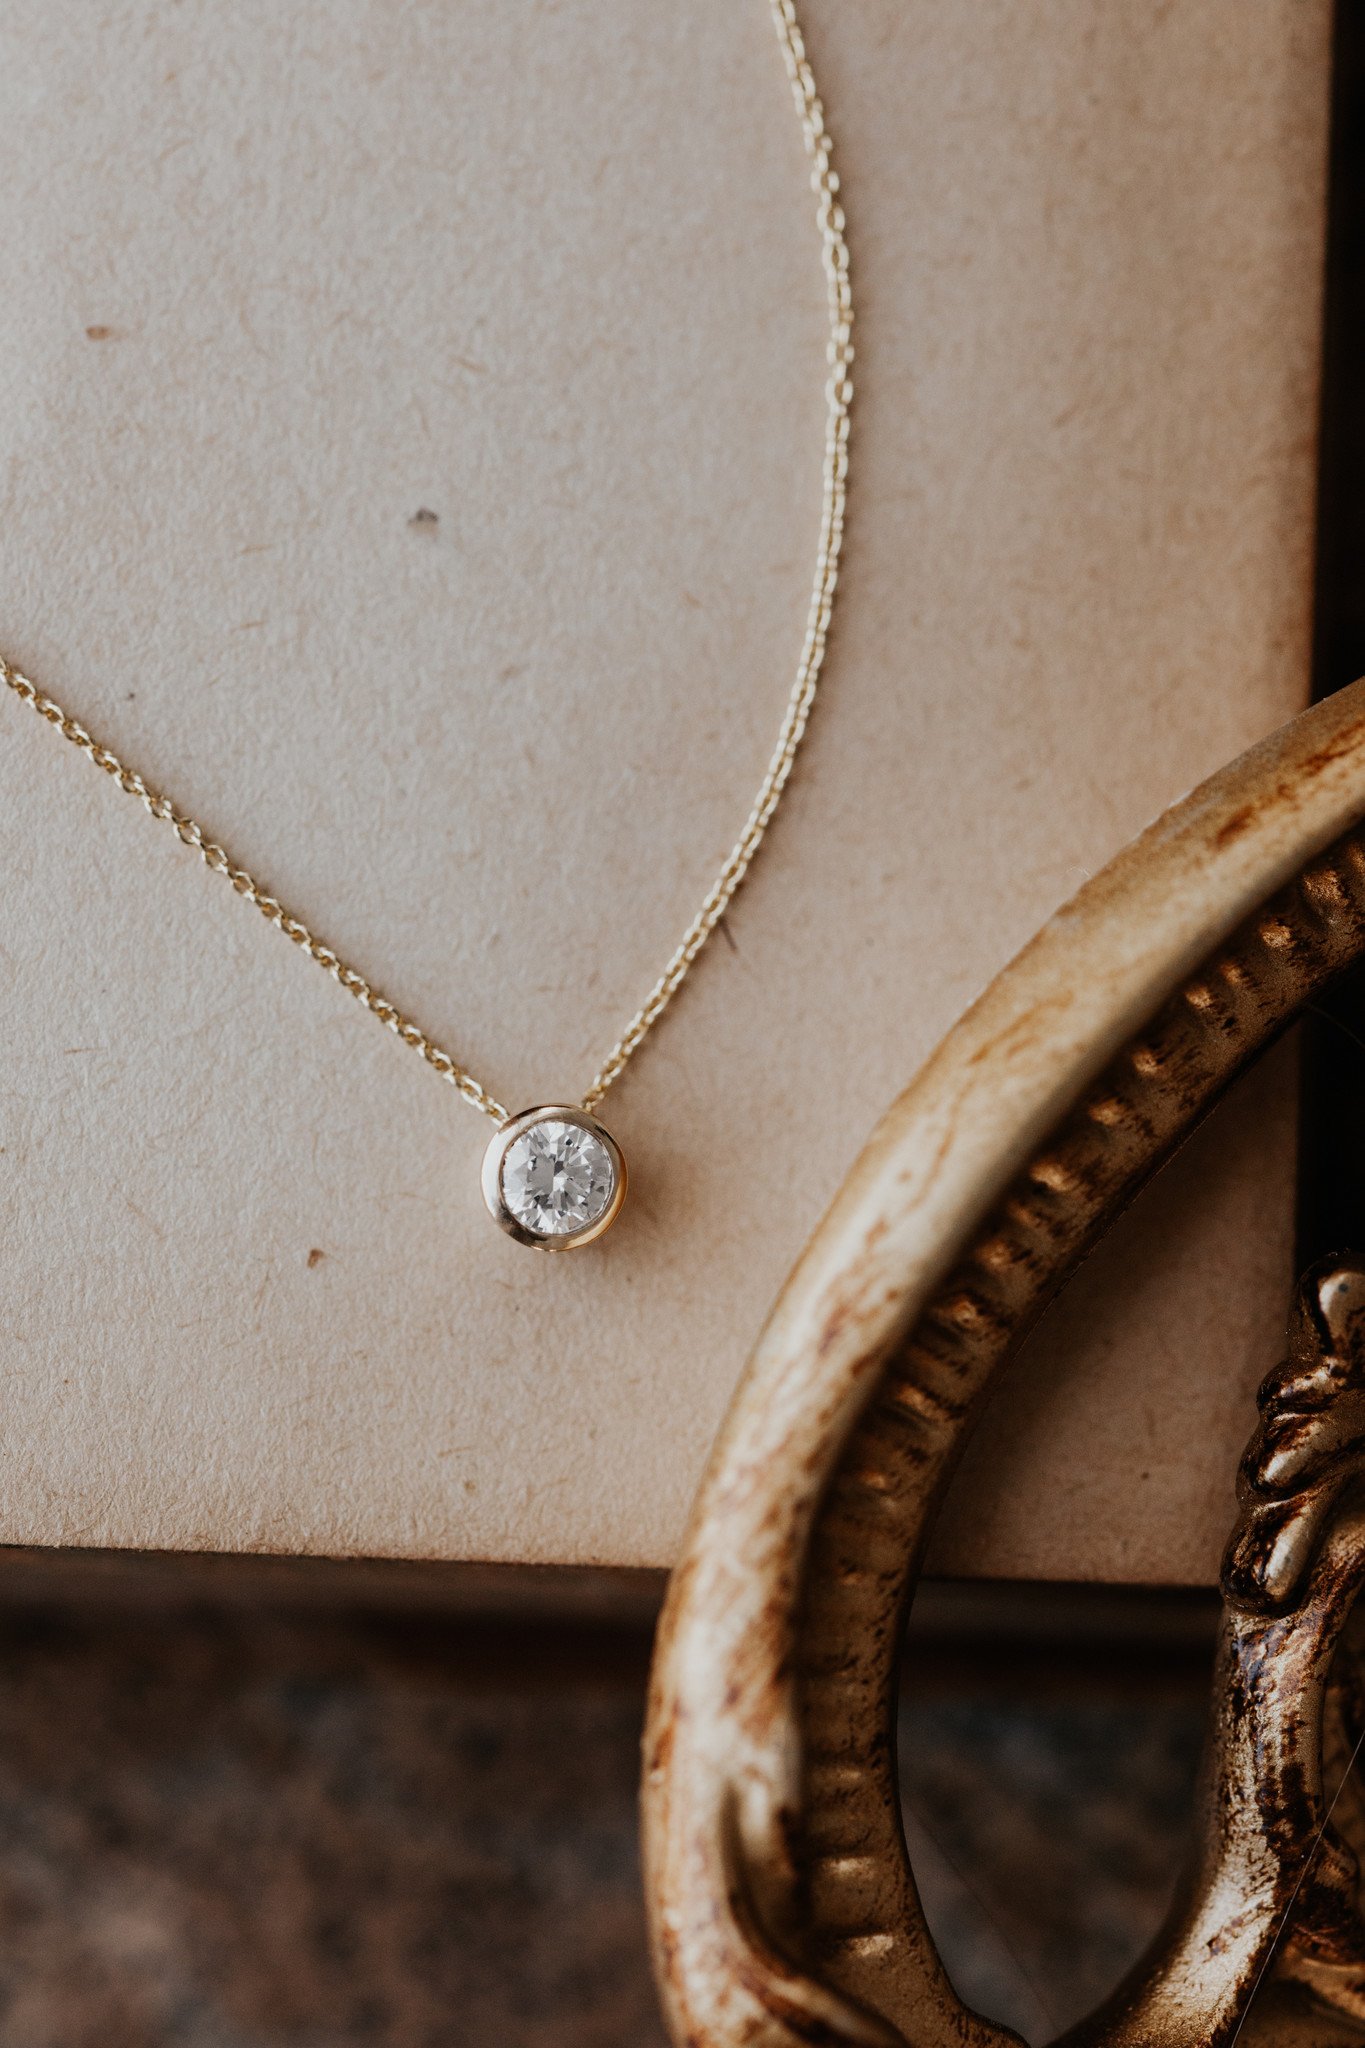 Ethical & Sustainable Jewelry Brands to Support in 2022